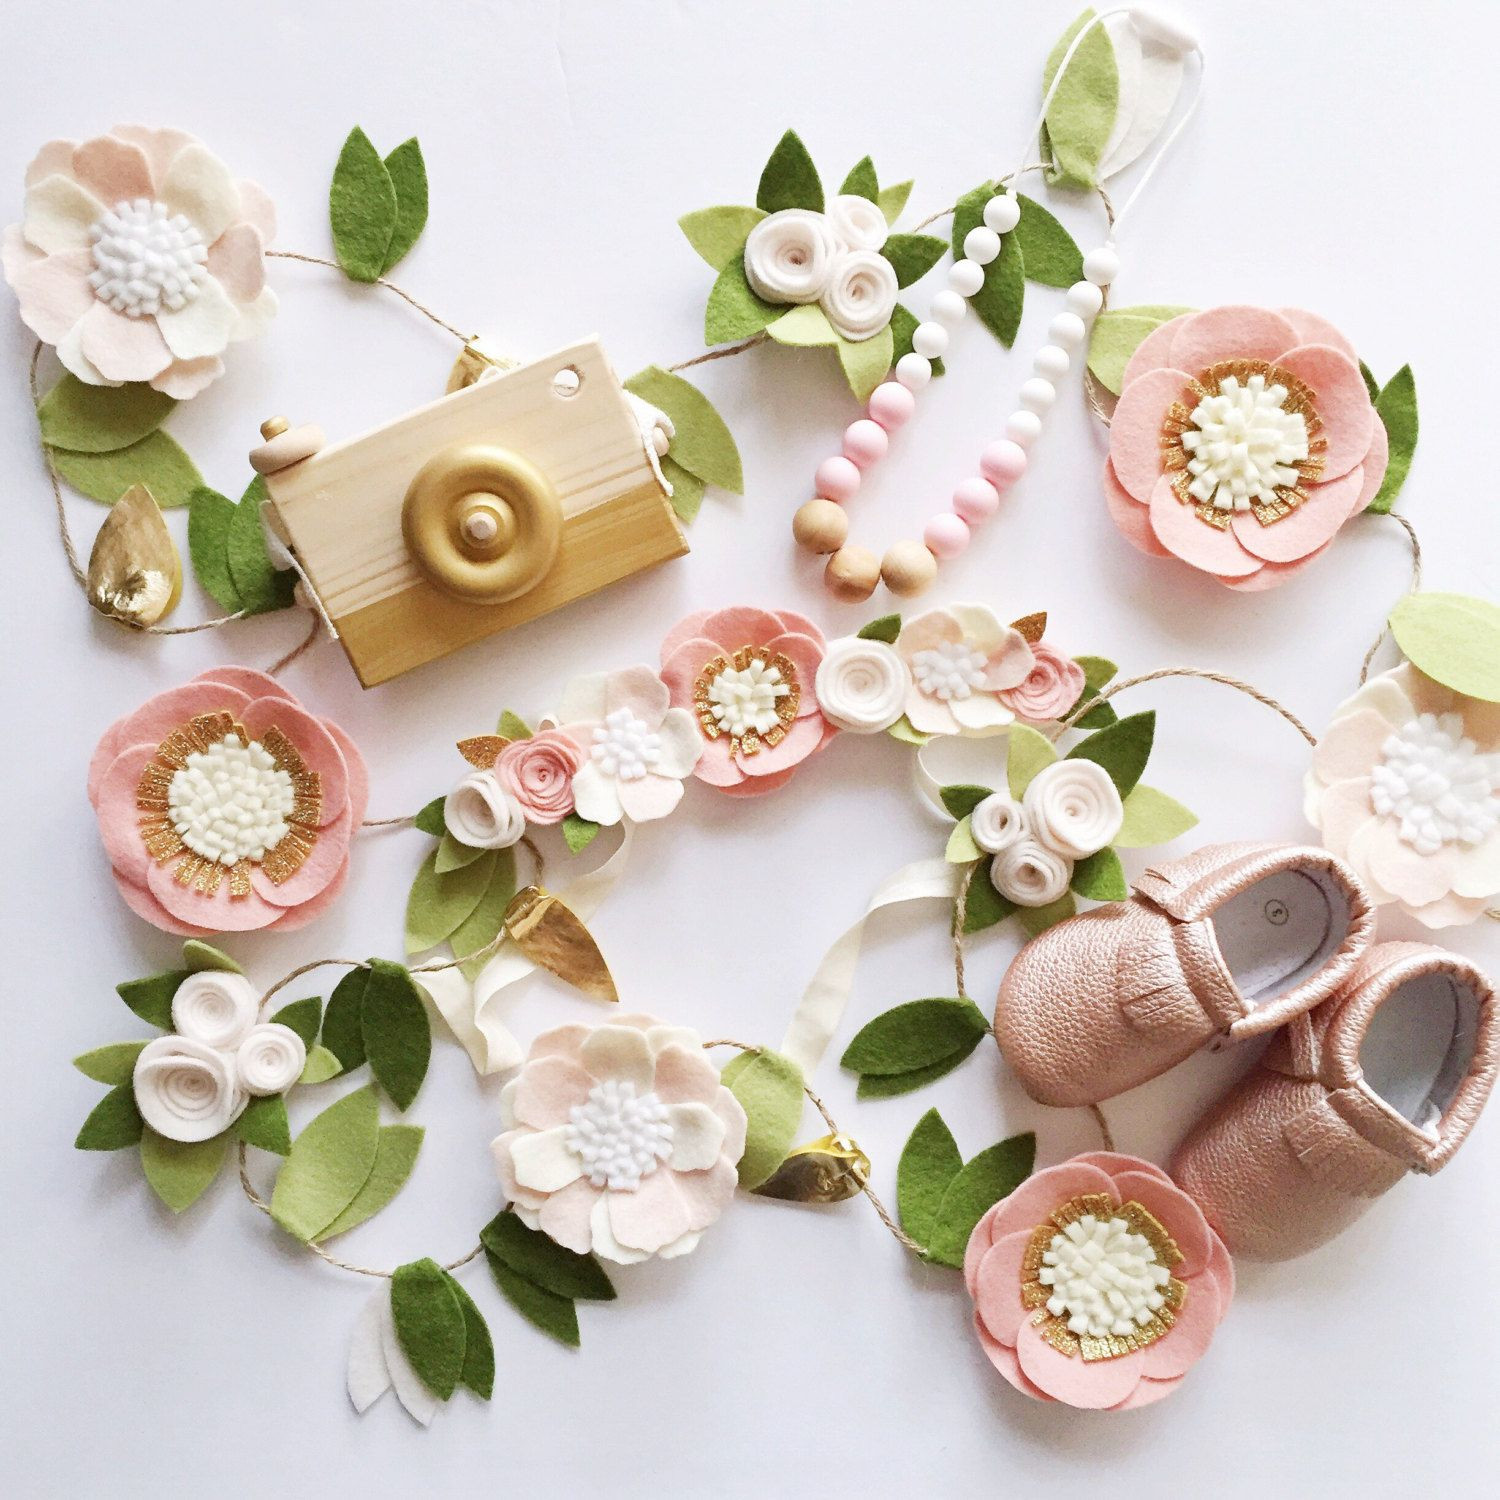 18 Lovable Personalized Vase Flower Delivery 2024 free download personalized vase flower delivery of gorgeous felt flower garland in blush pink gold white ivory and intended for gorgeous felt flower garland in blush pink gold white ivory and other neutra